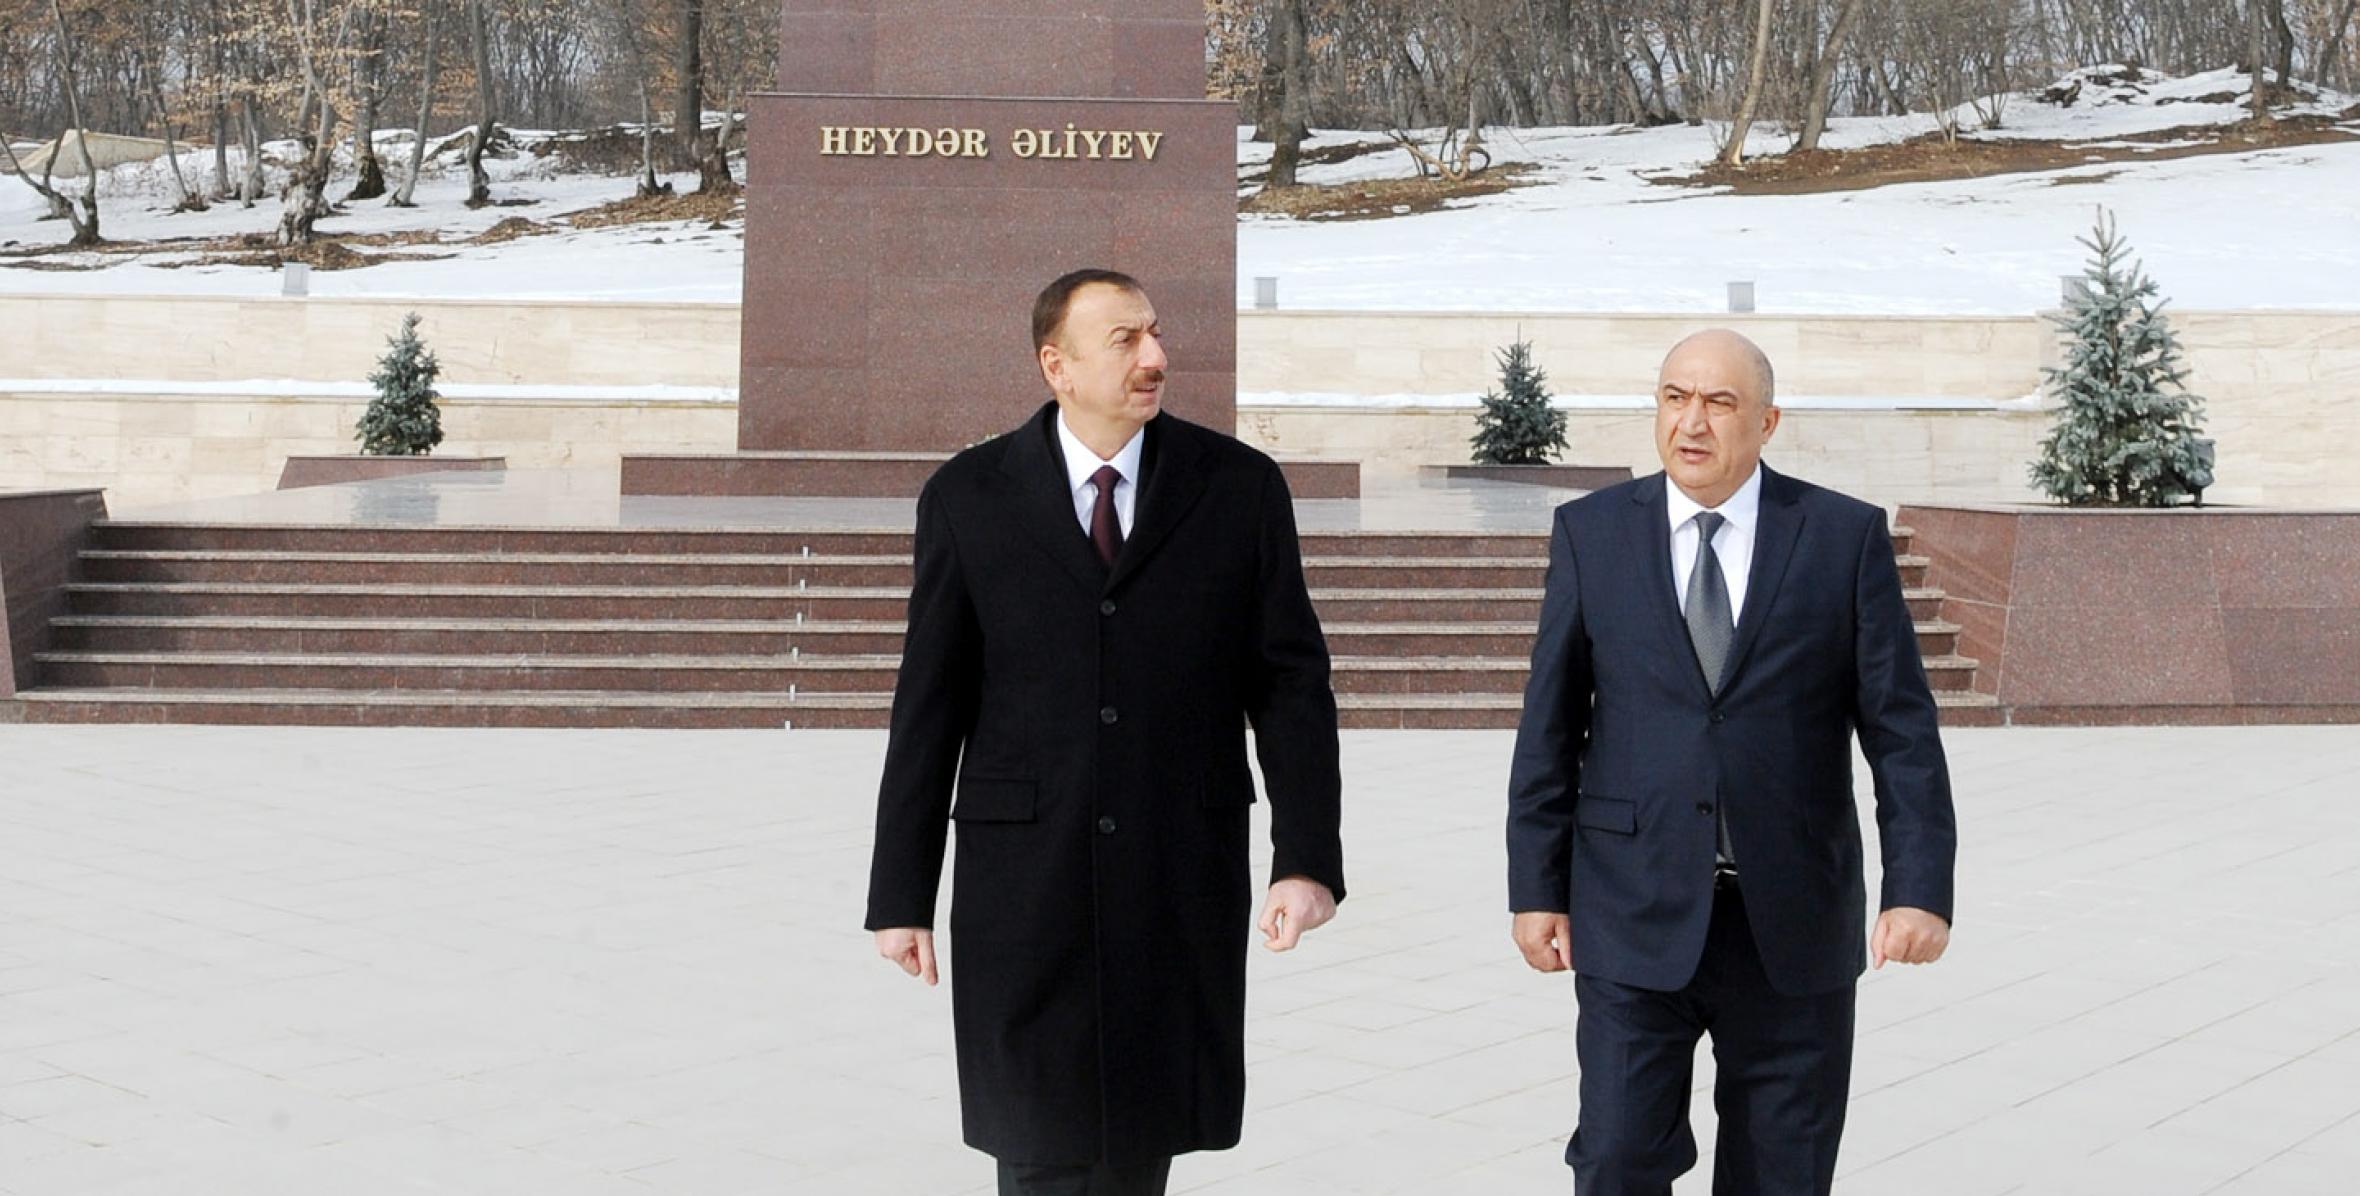 Ilham Aliyev arrived in Gusar District